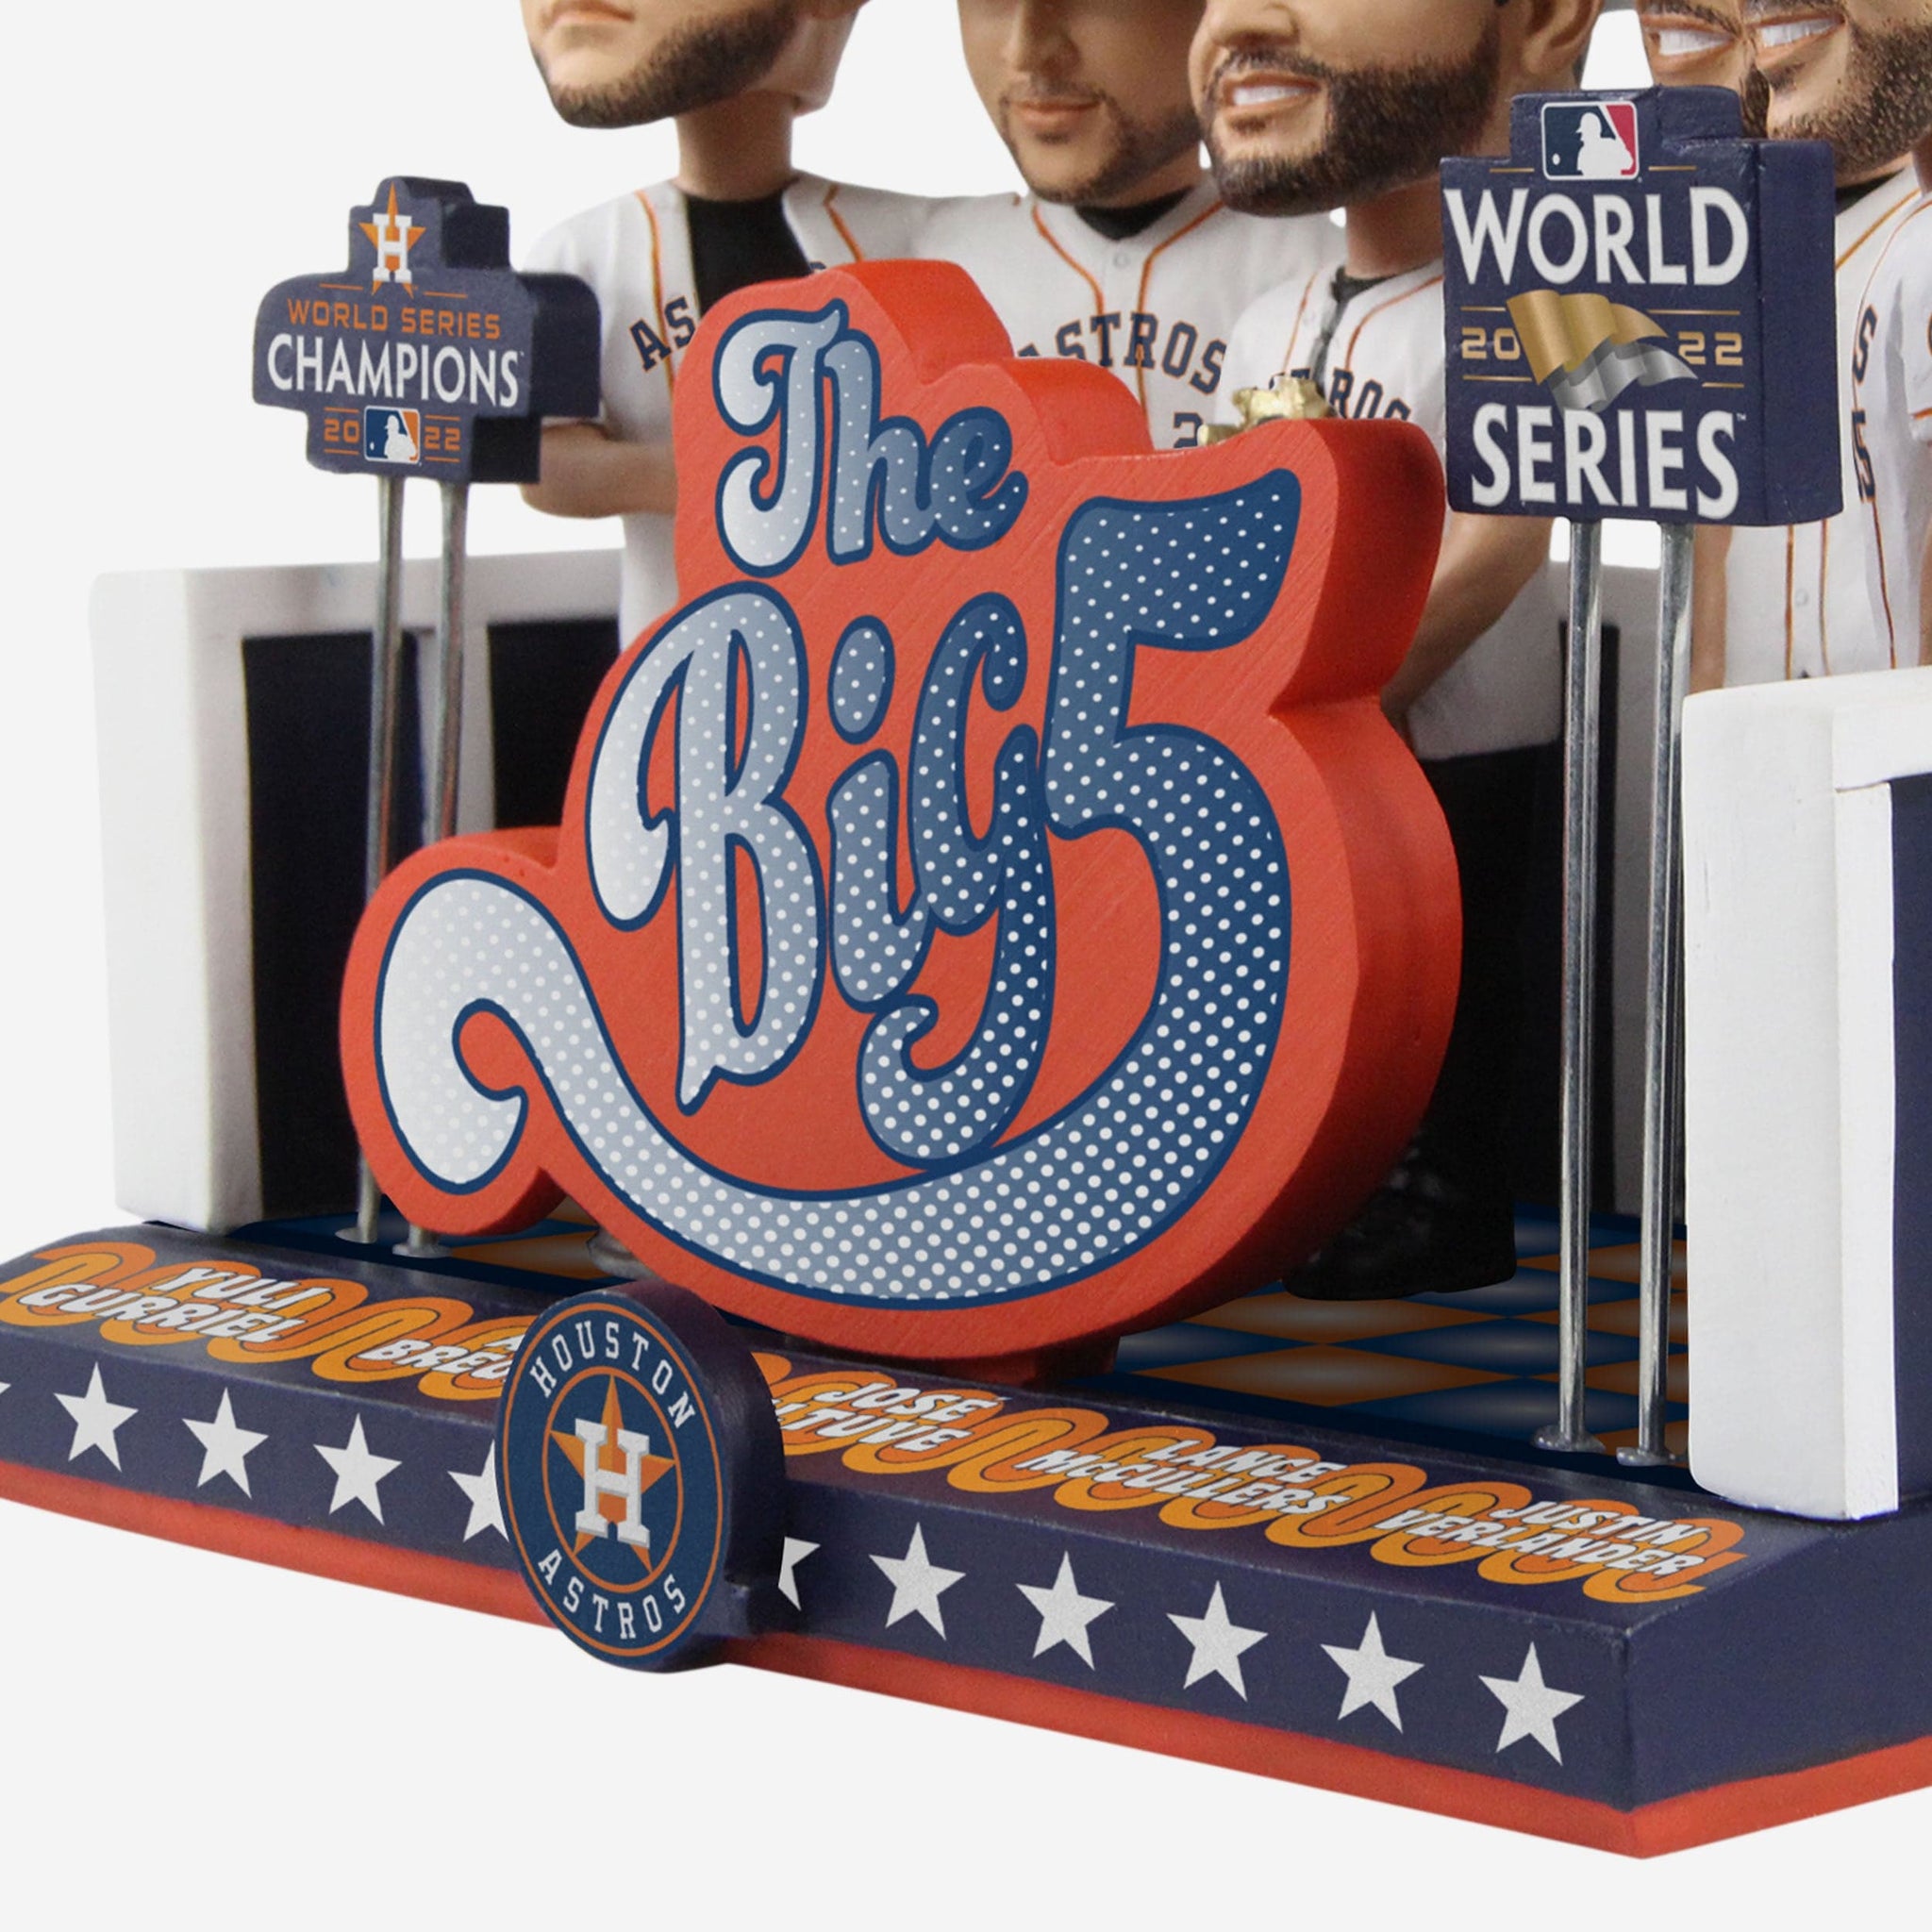 New Houston Astros American League Championship Series Bobbleheads Released  by FOCO - Sports Illustrated Inside The Astros